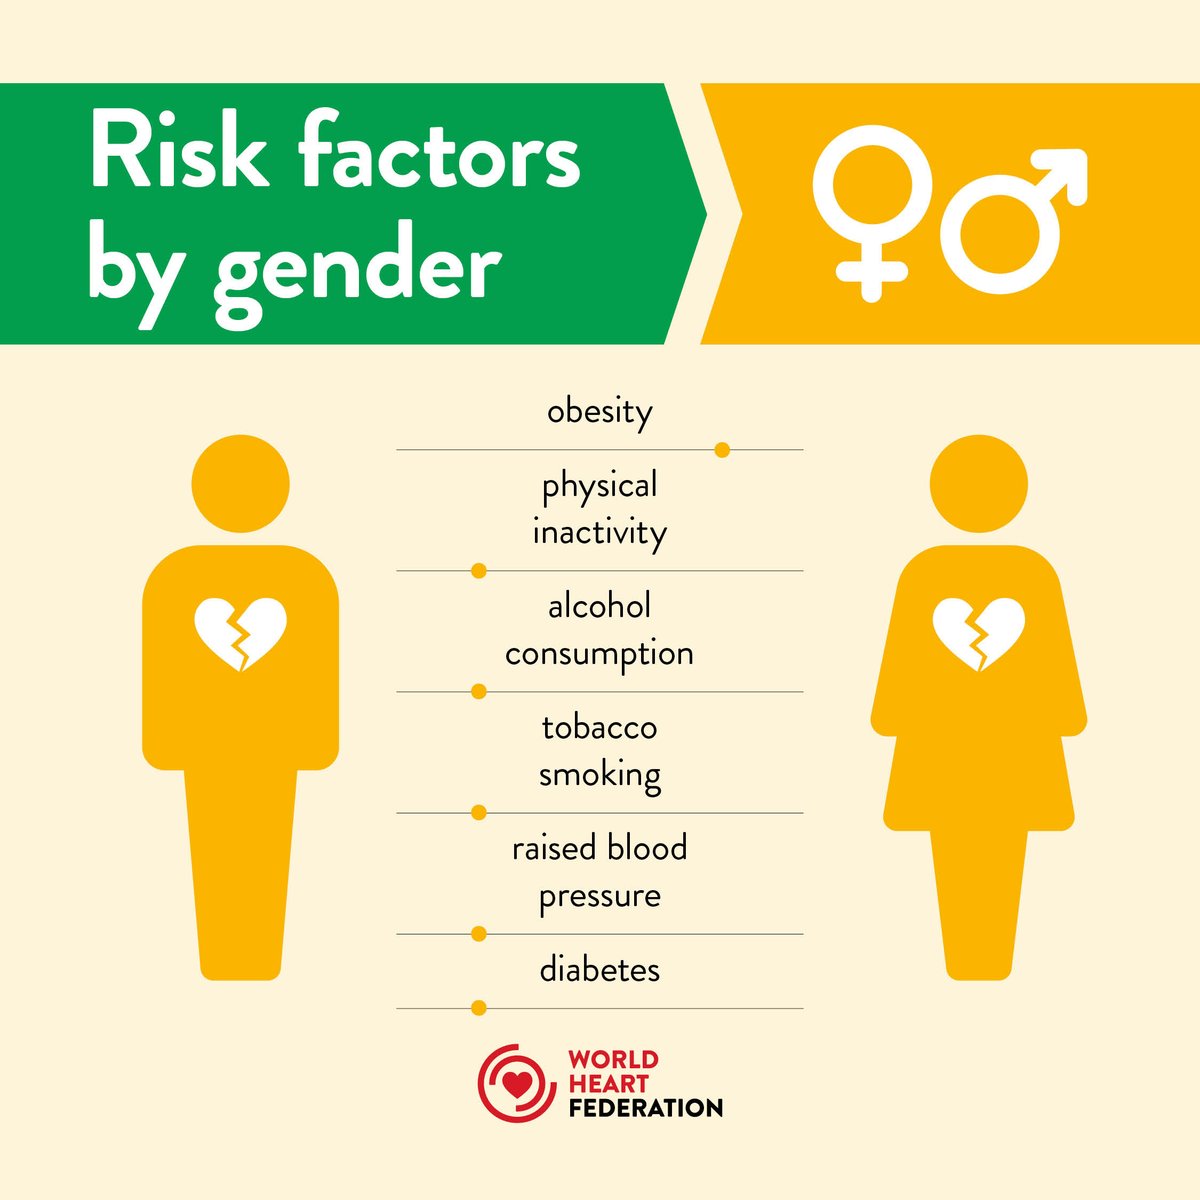 #DYK❓ Most risk factors for cardiovascular disease are higher in men than women. #Obesity is the only risk factor that is higher in women. Download the first #WorldHeartReport: worldheart.org/world-heart-re… #cardiotwitter